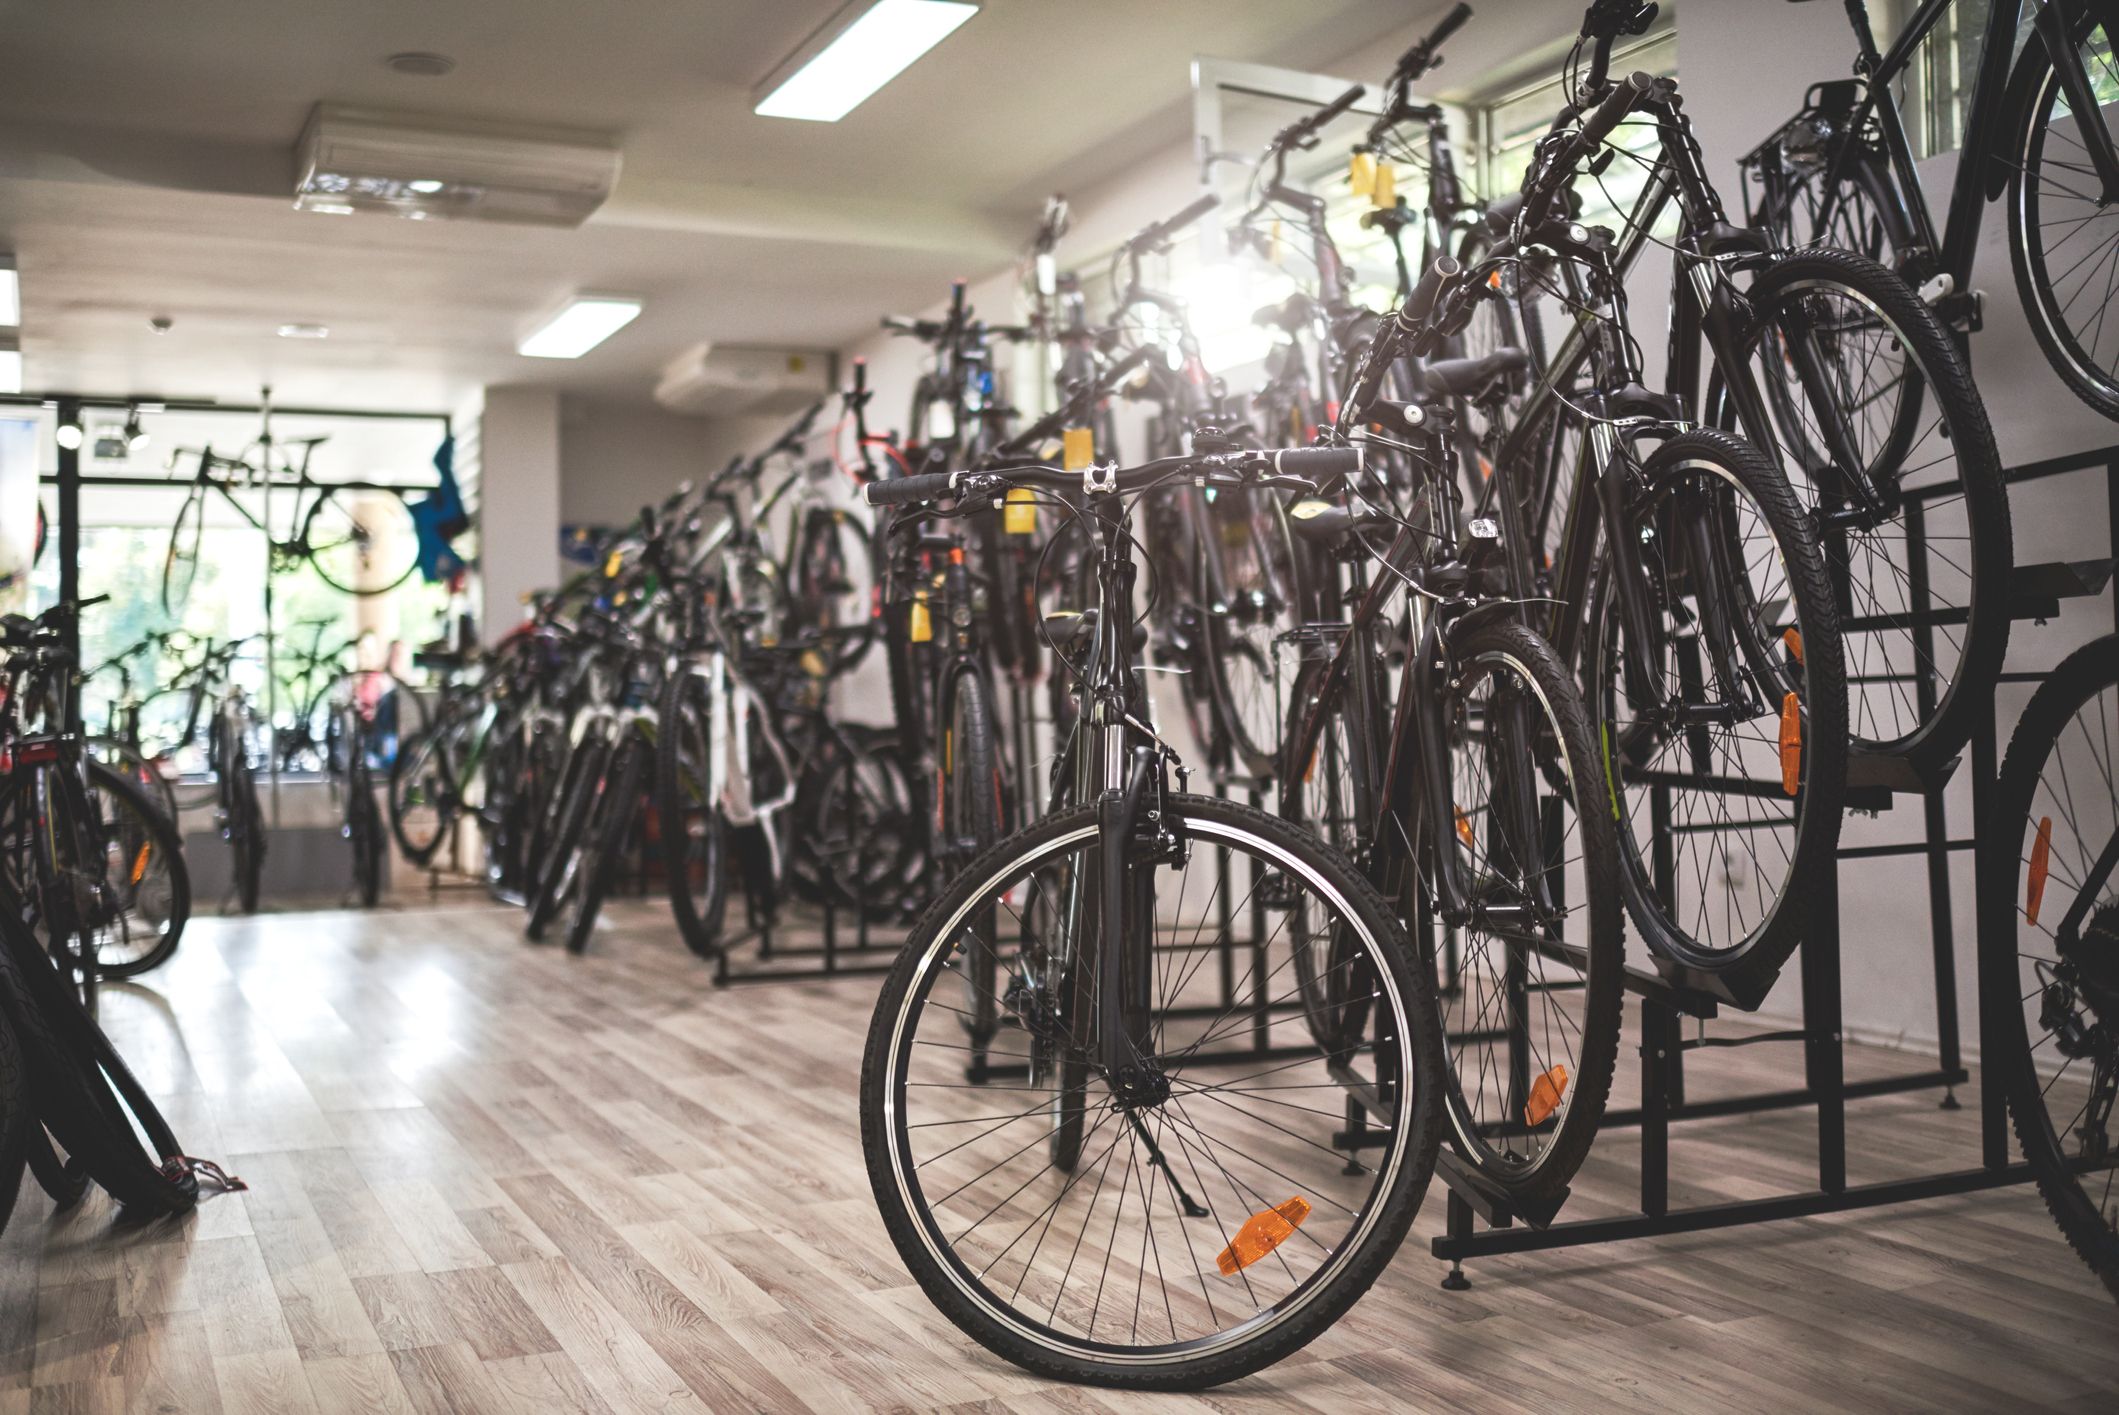 Deals | Get Great Price on a Bike